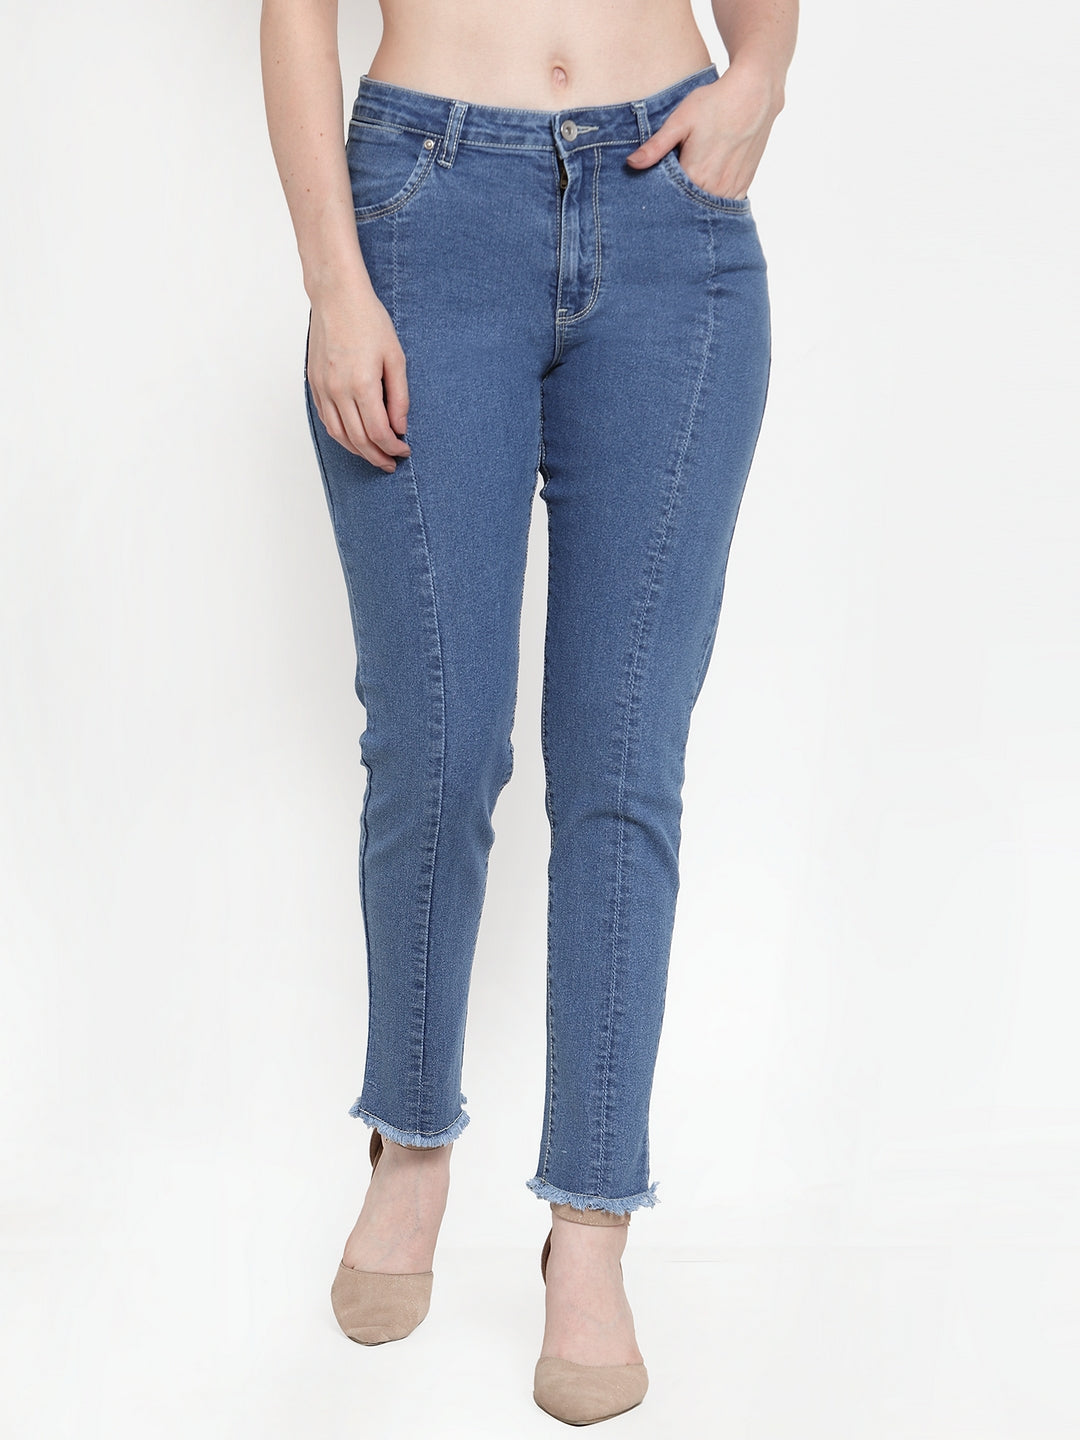 Women Blue Denim Solid Fitted Jeans